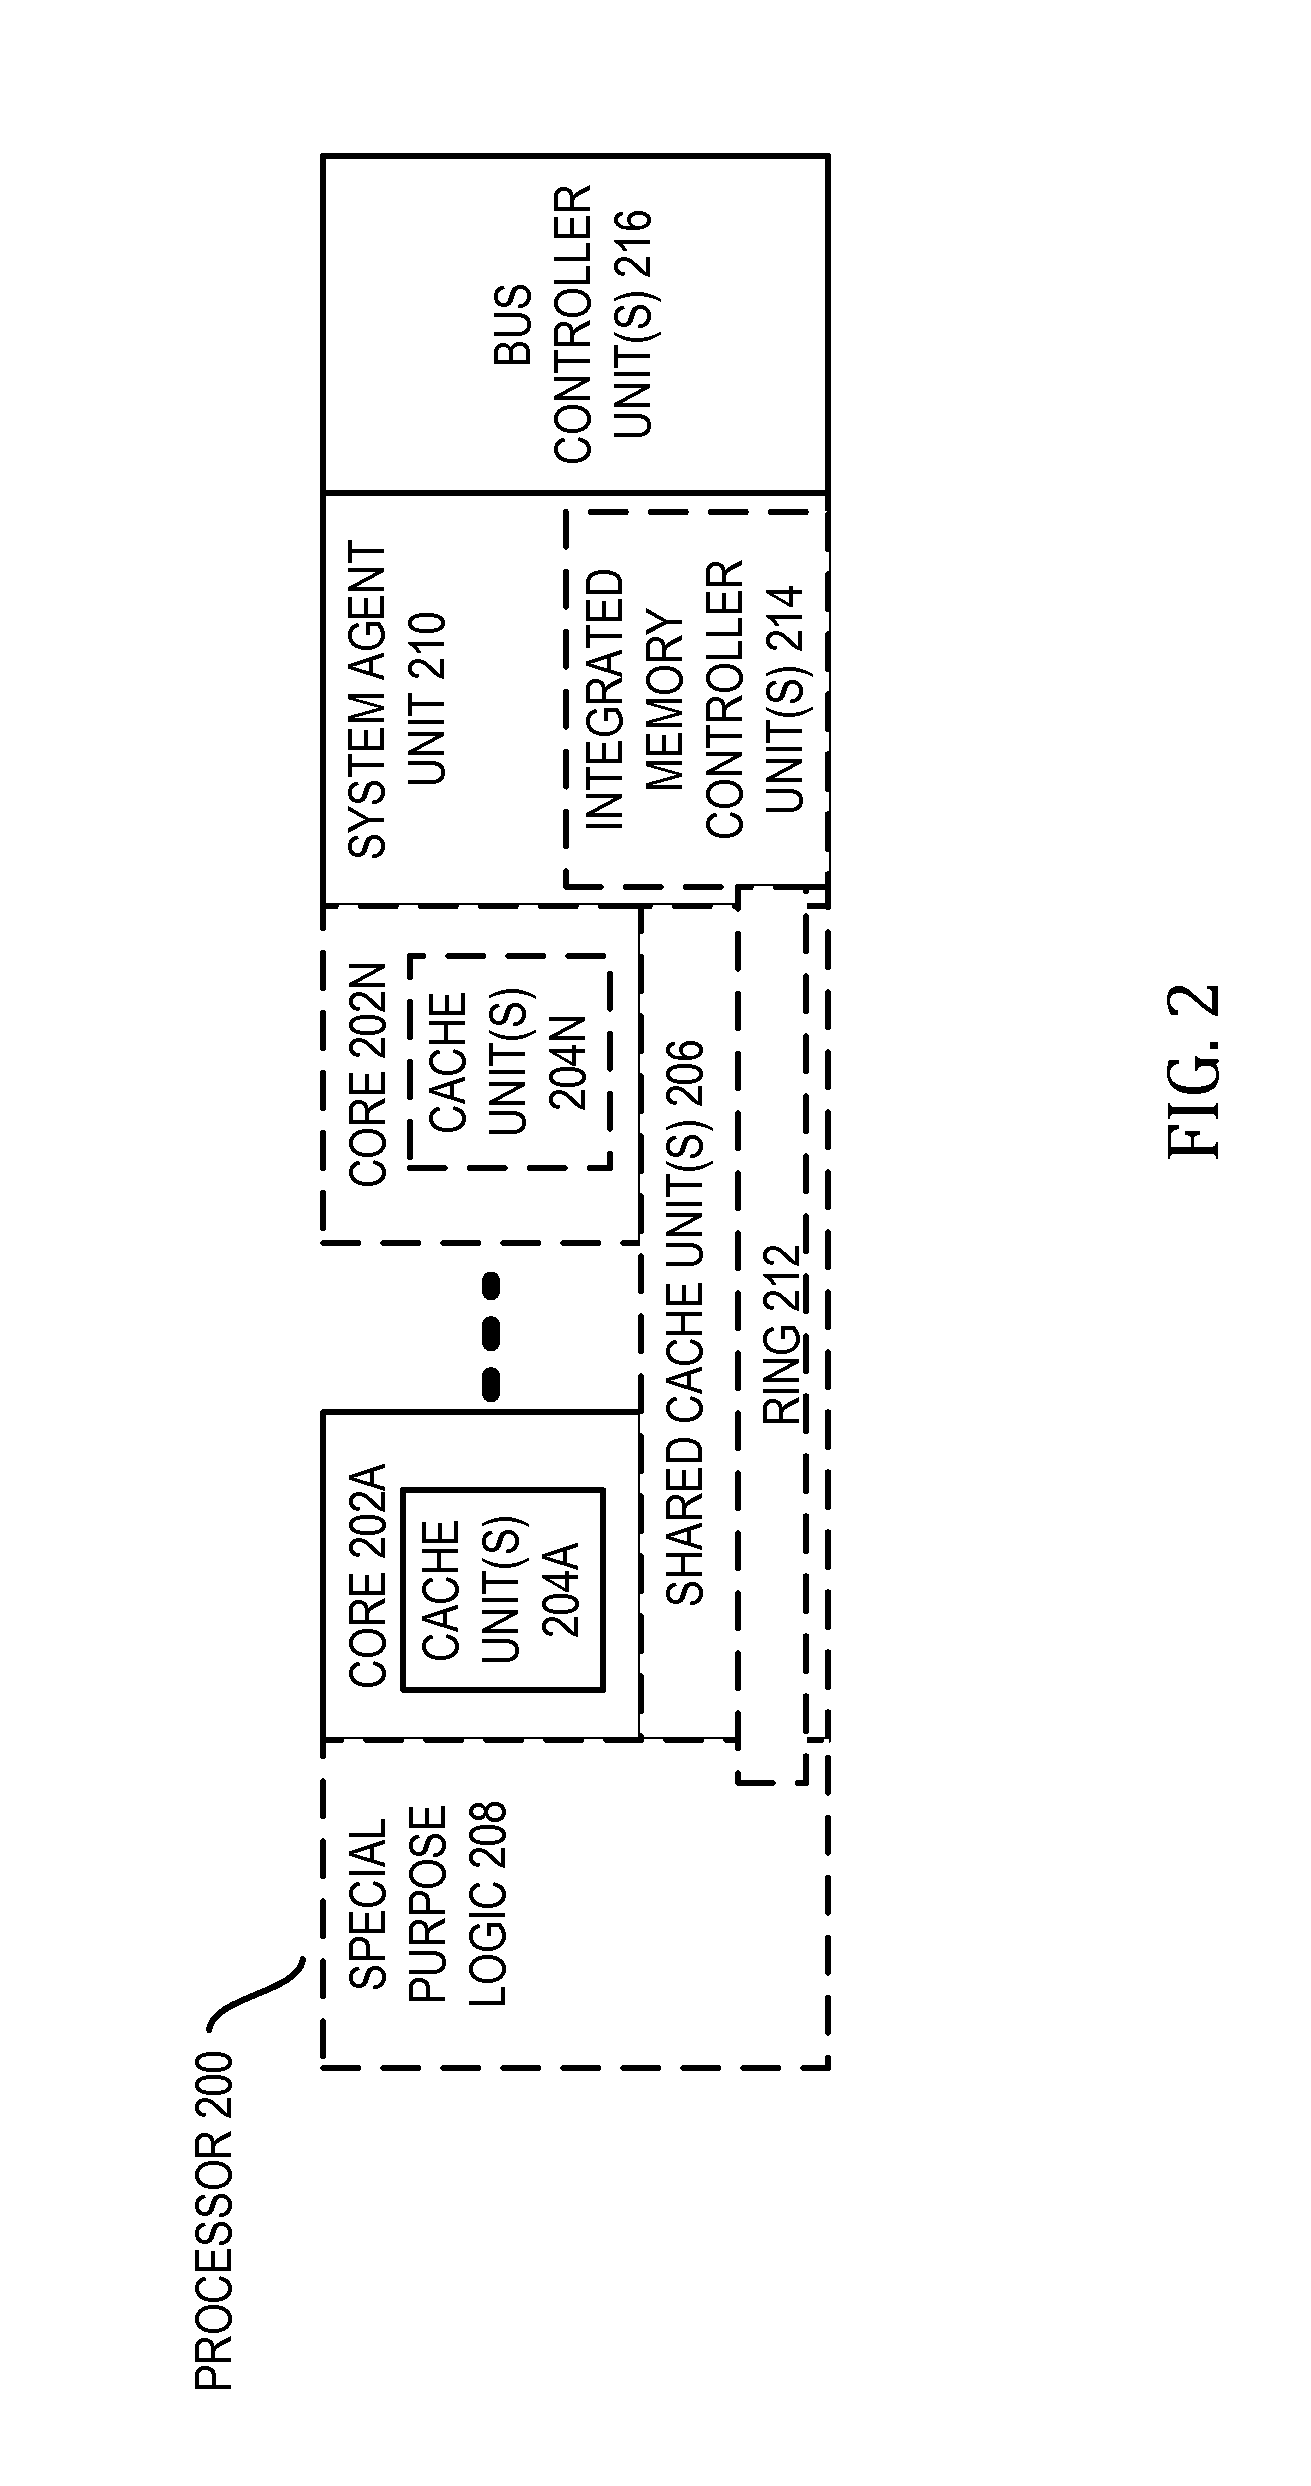 Collective communications apparatus and method for parallel systems